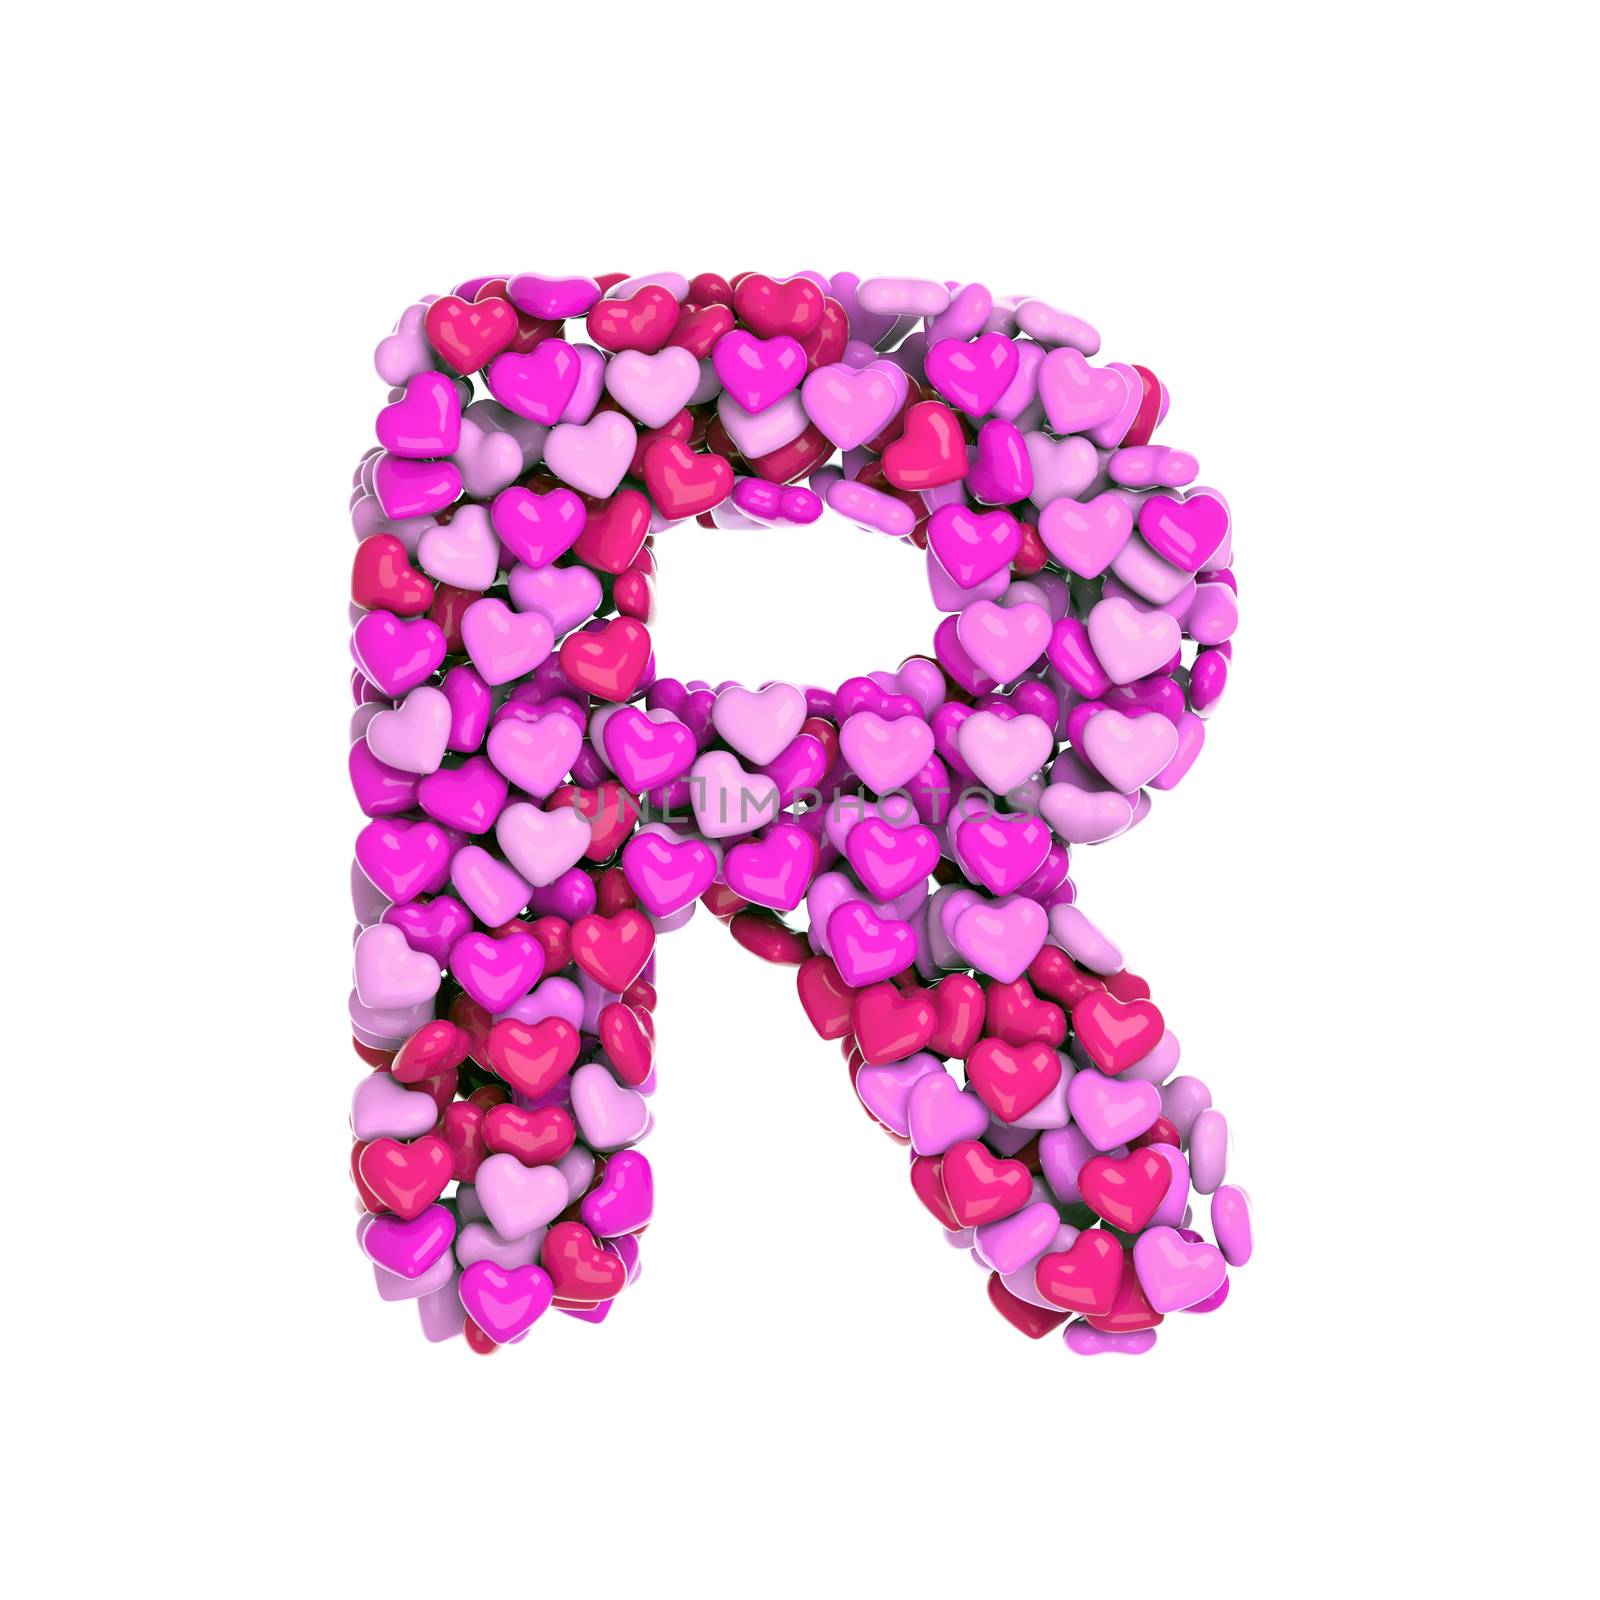 Valentine letter R - Uppercase 3d pink hearts font - Love, passion or wedding concept by chrisroll